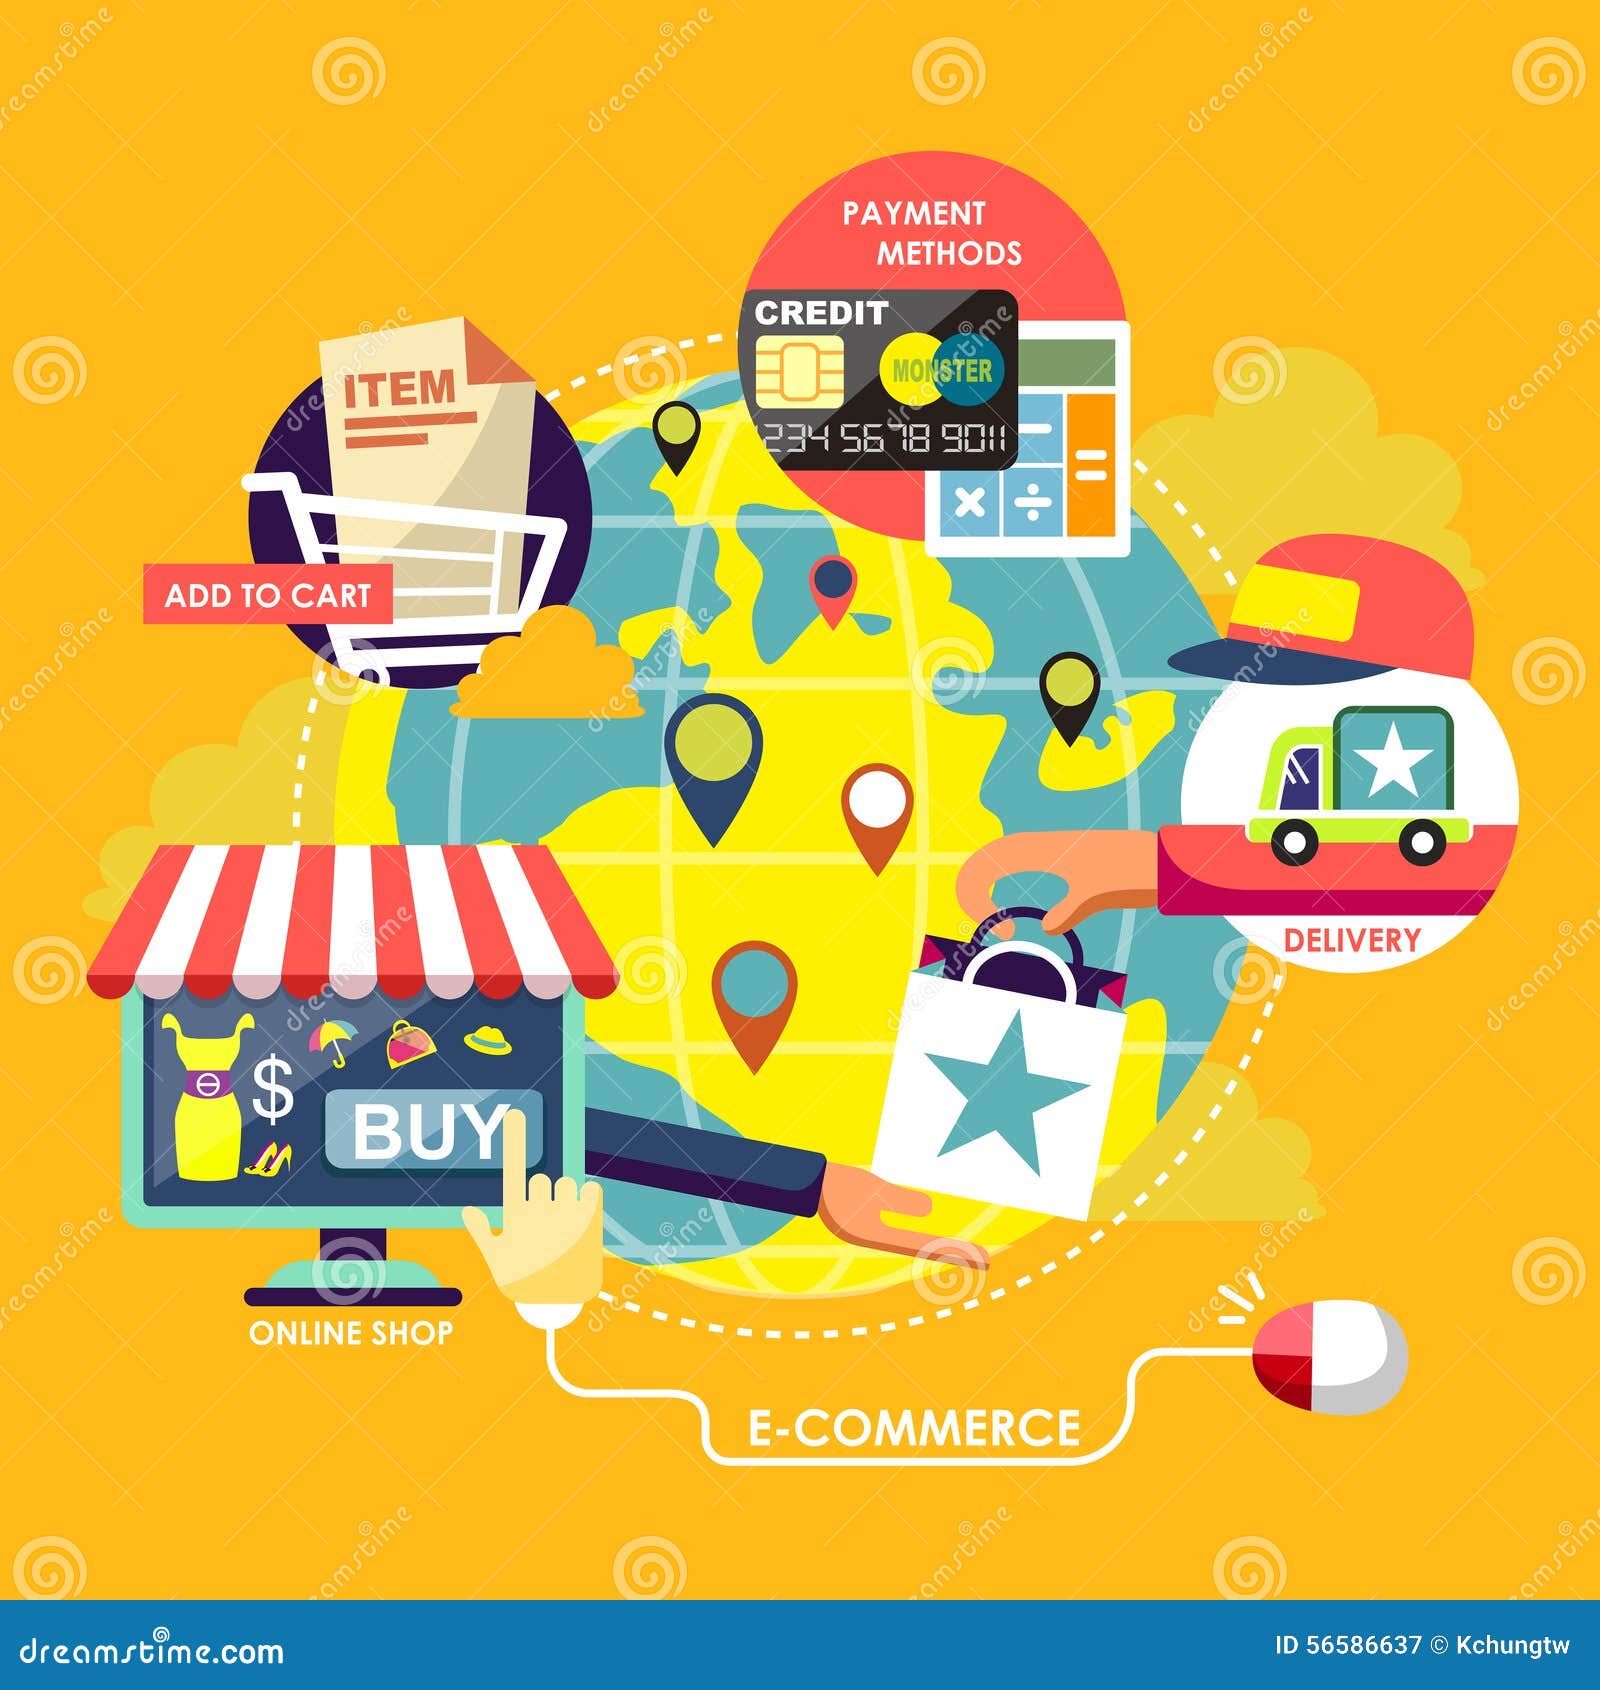 commerce Process Concepts In Flat Design Stock Vector - Image ...